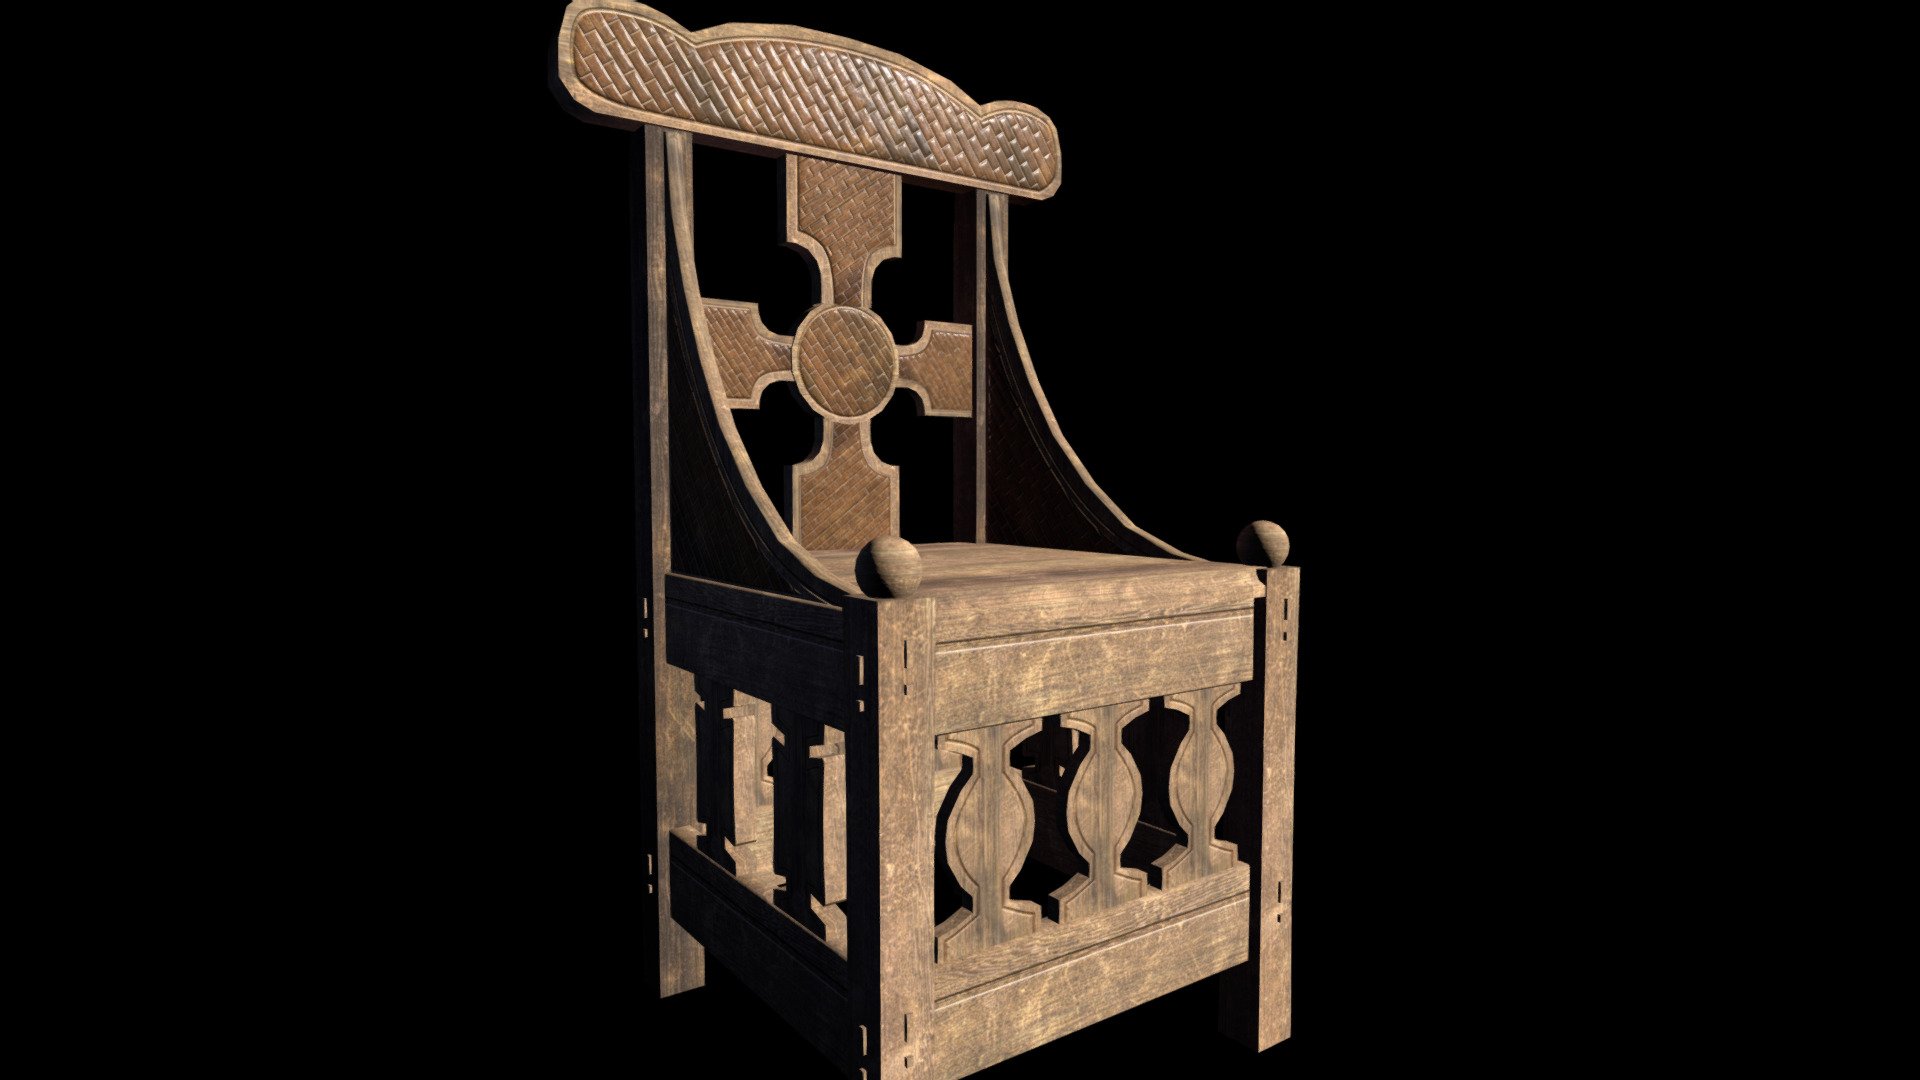 Viking Chair style - Viking Chair #2 - 3D model by The Ancient Forge (Svein) (@svein) 3d model